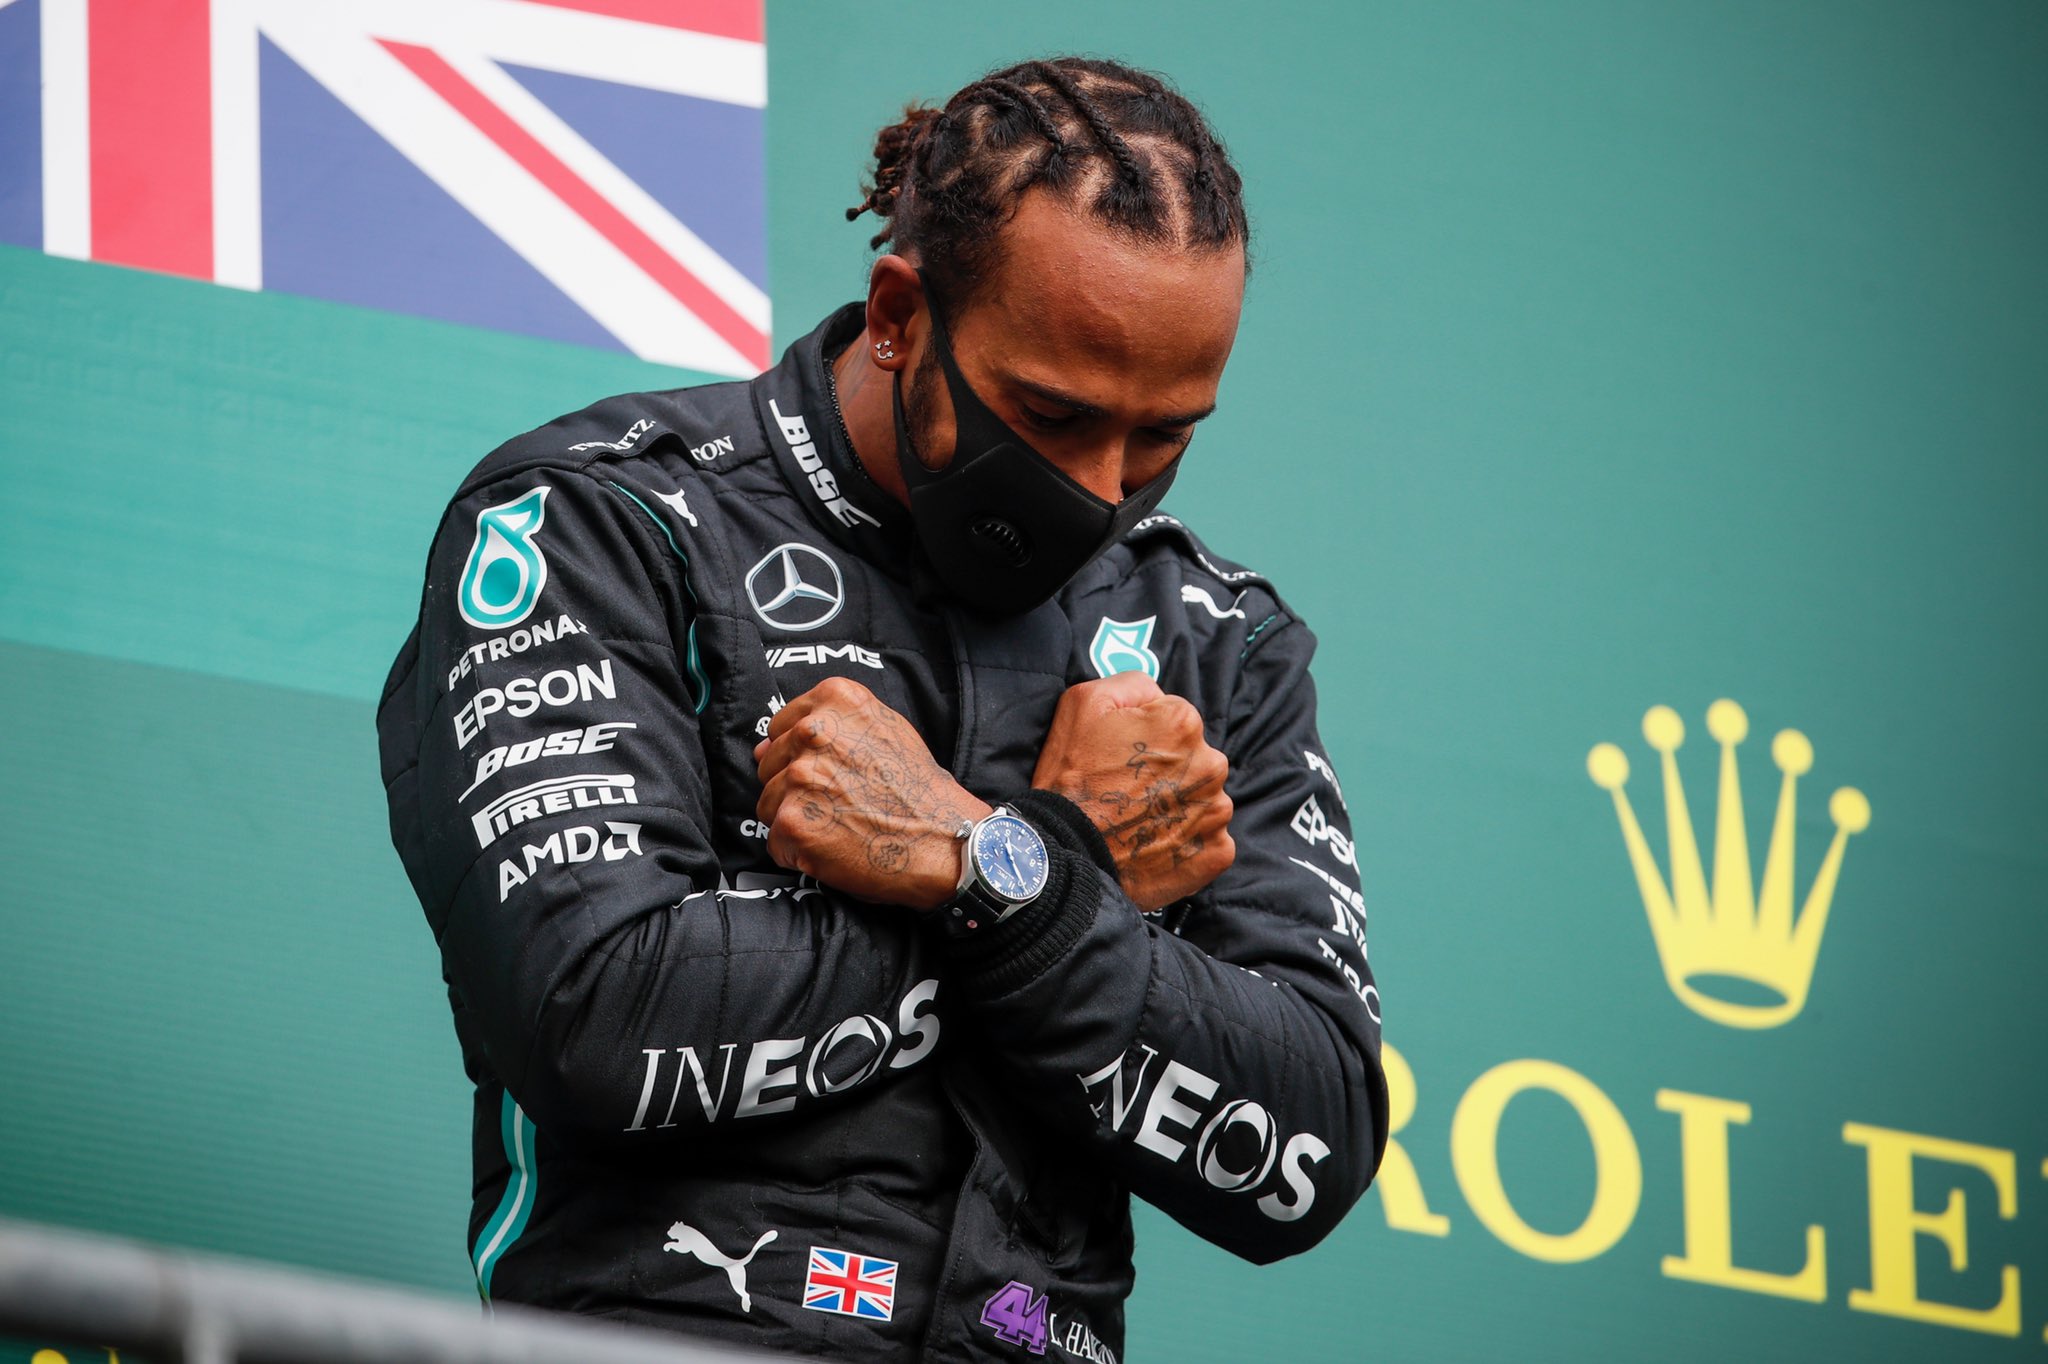 IMG 20200831 161957 3fdb7ad0aa5d62d44d24286d647289d9 - Lewis Hamilton cruises to yet another win